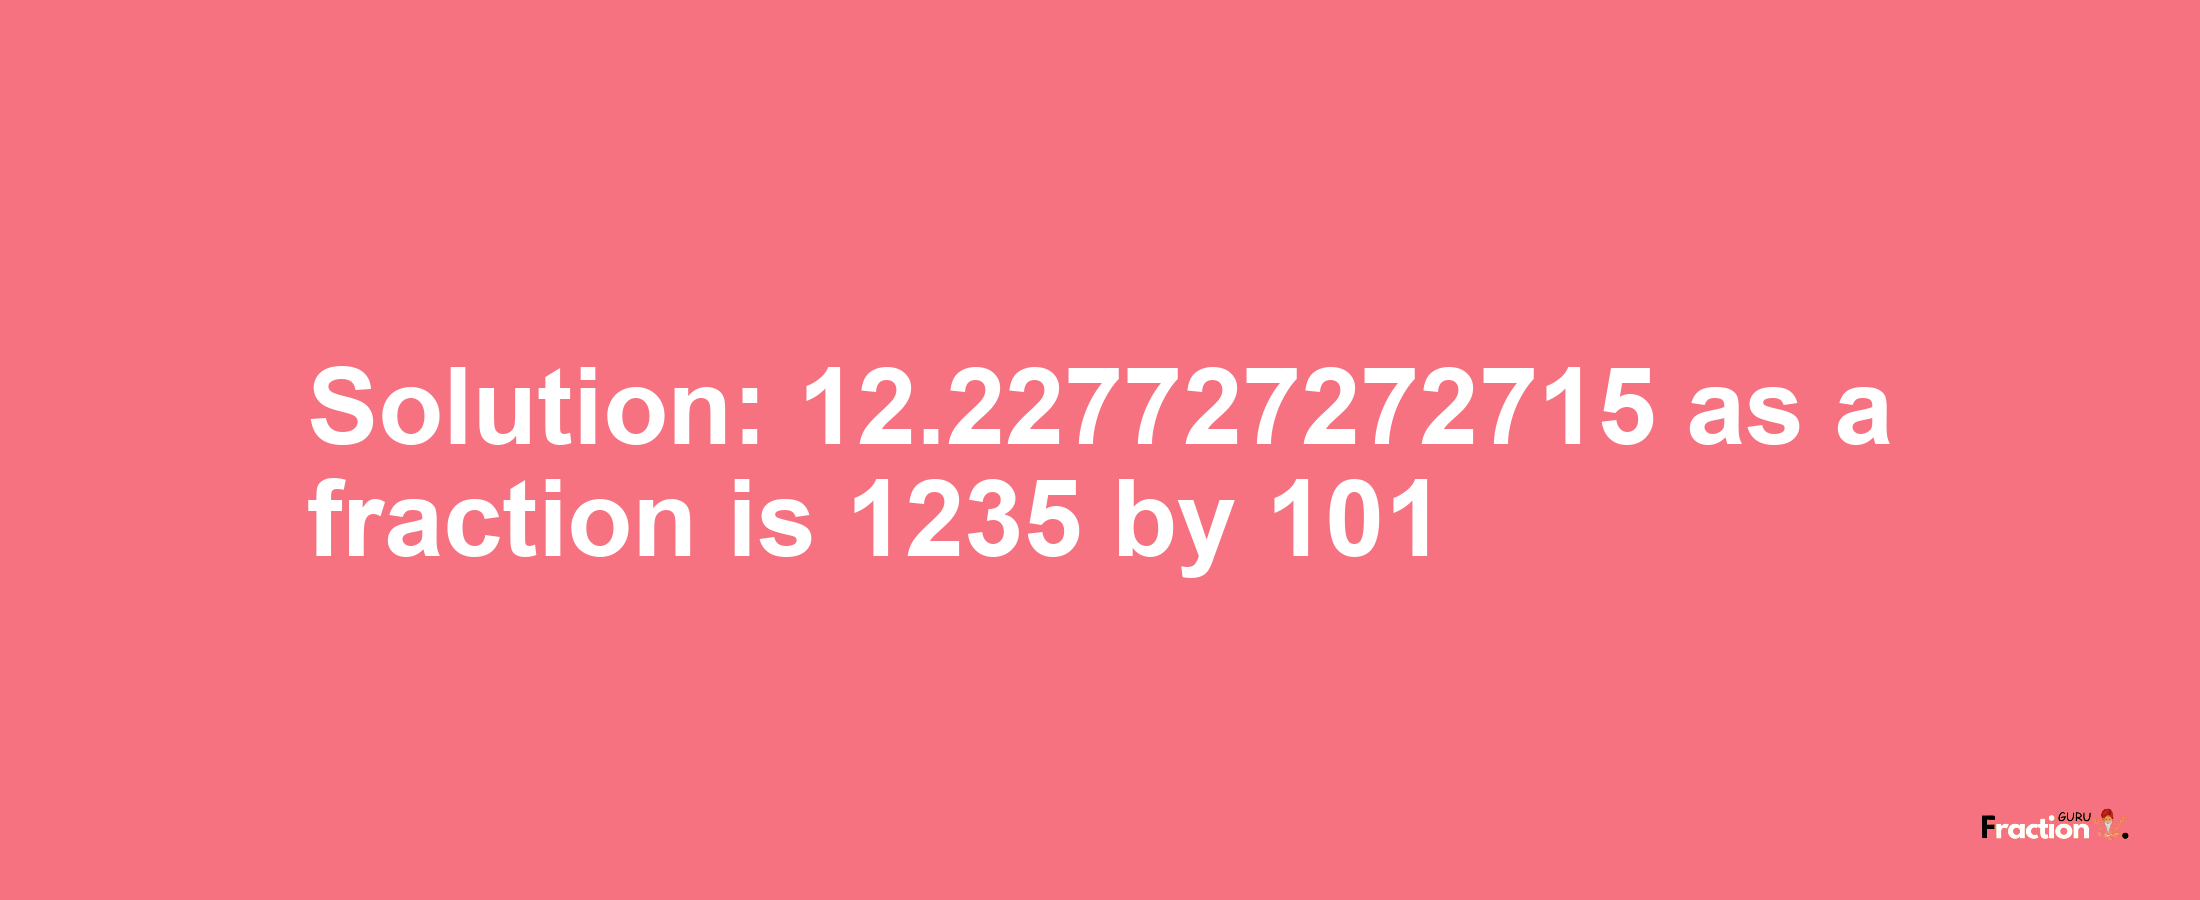 Solution:12.227727272715 as a fraction is 1235/101